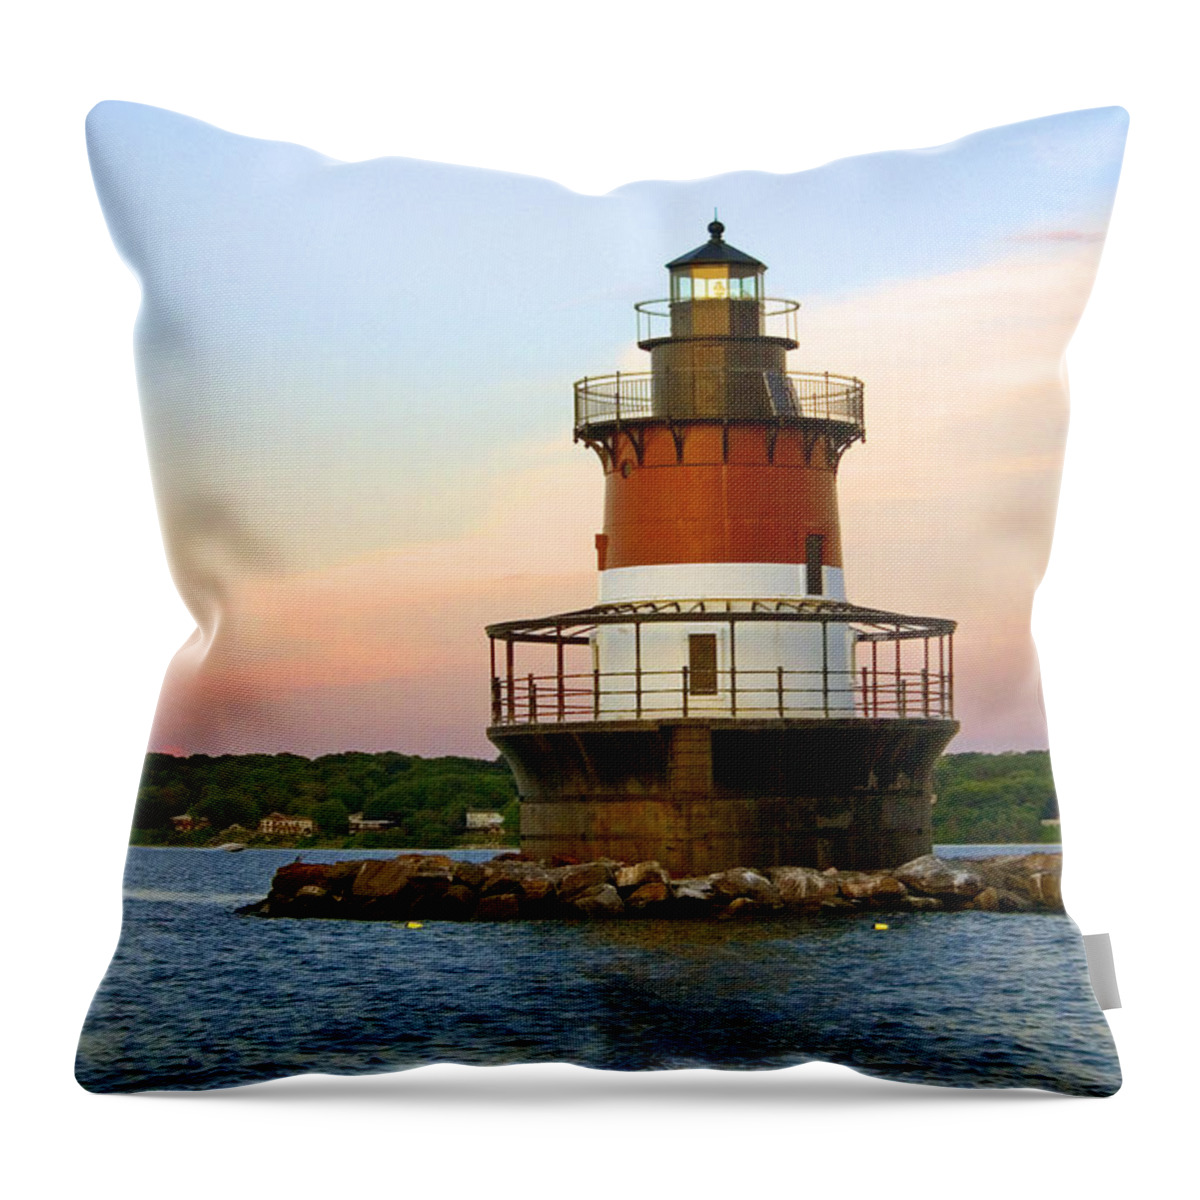 Tranquility Throw Pillow featuring the photograph Plum Beach Lighthouse, Rhode Island by Jeremy D'entremont, Www.lighthouse.cc